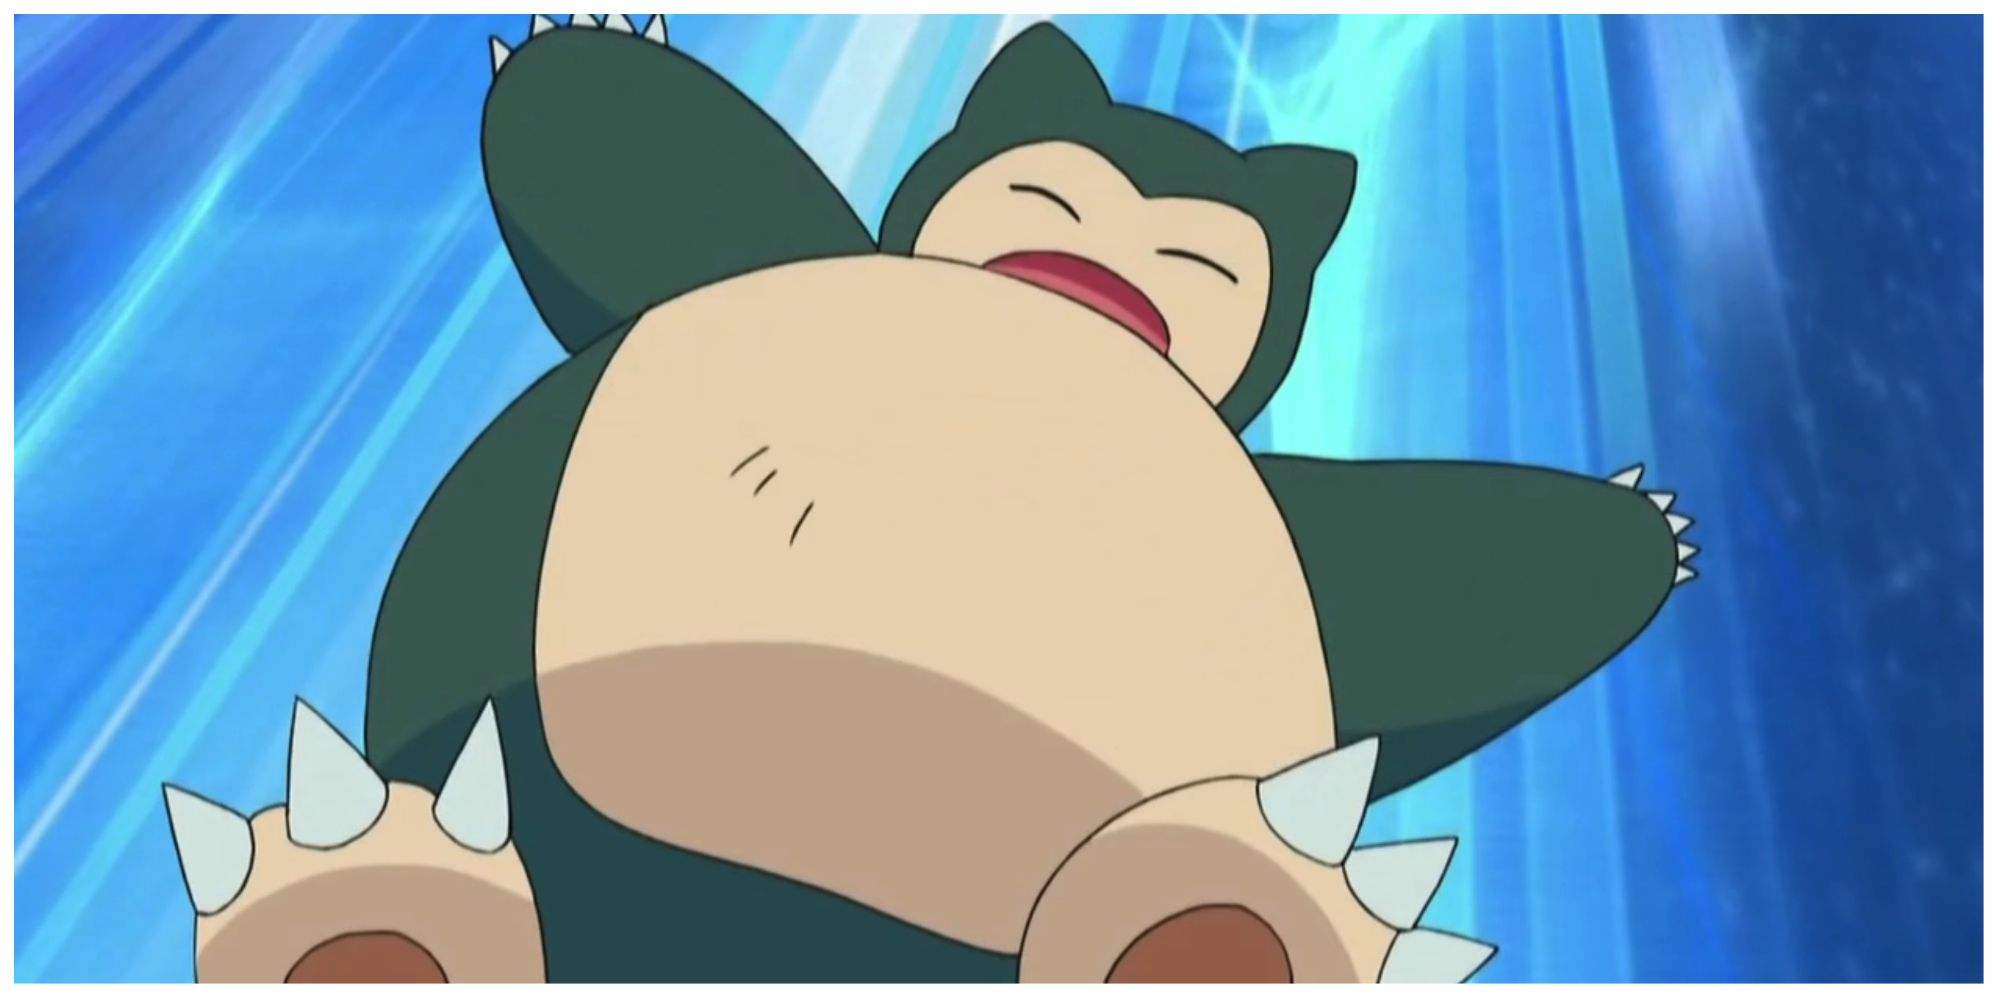 Ash Ketchum's Snorlax in the Pokemon anime